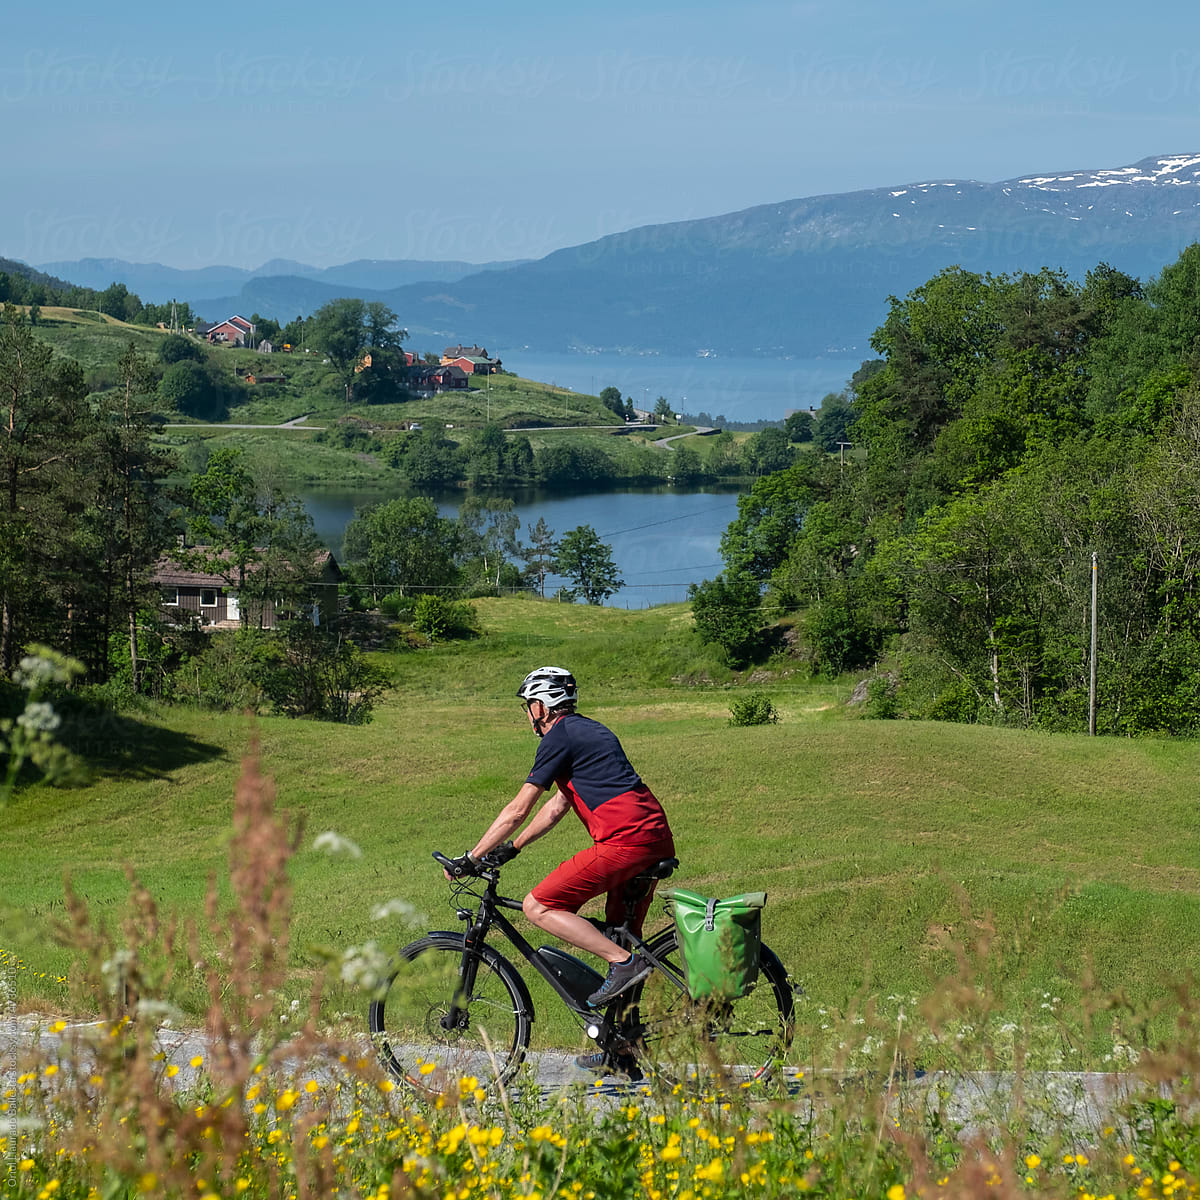 A man enjoying retirement, doing an bicycle route through Norway.